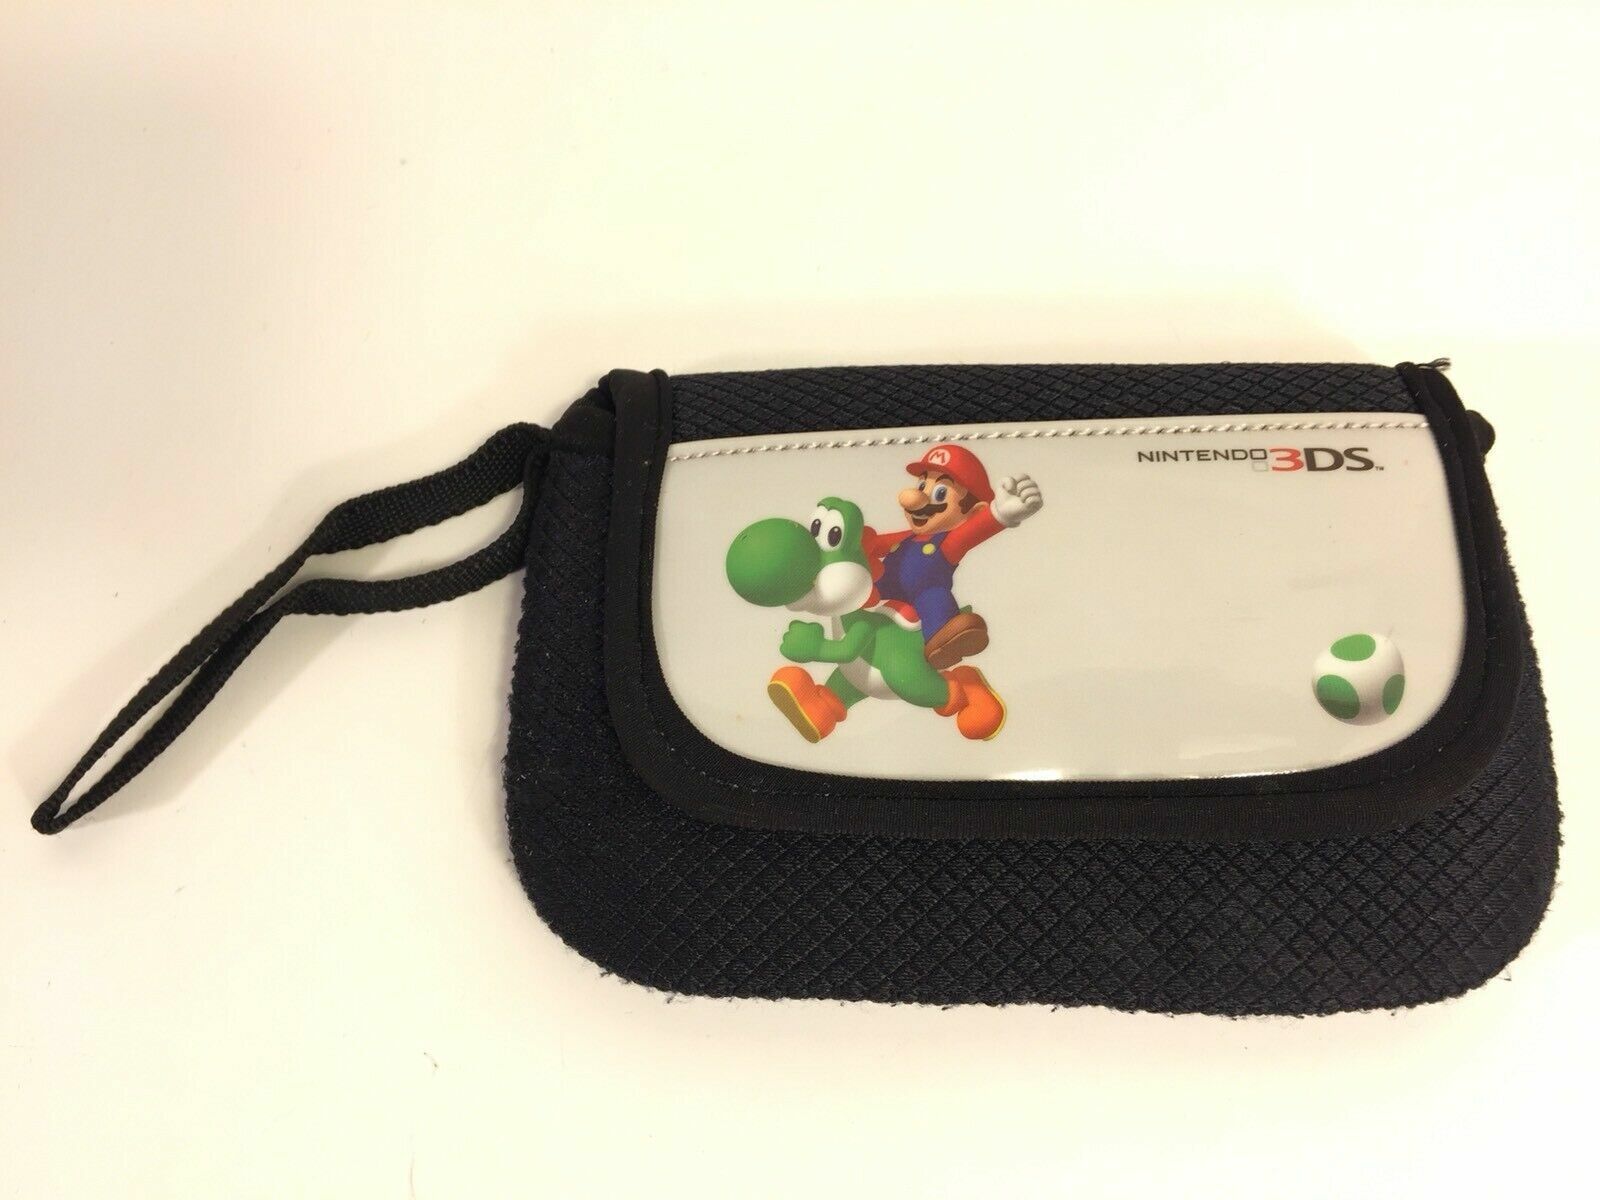 Primary image for Nintendo 3DS Super Mario Yoshi Soft Carrying Case DS Lite DSI Travel Bag-
sho...